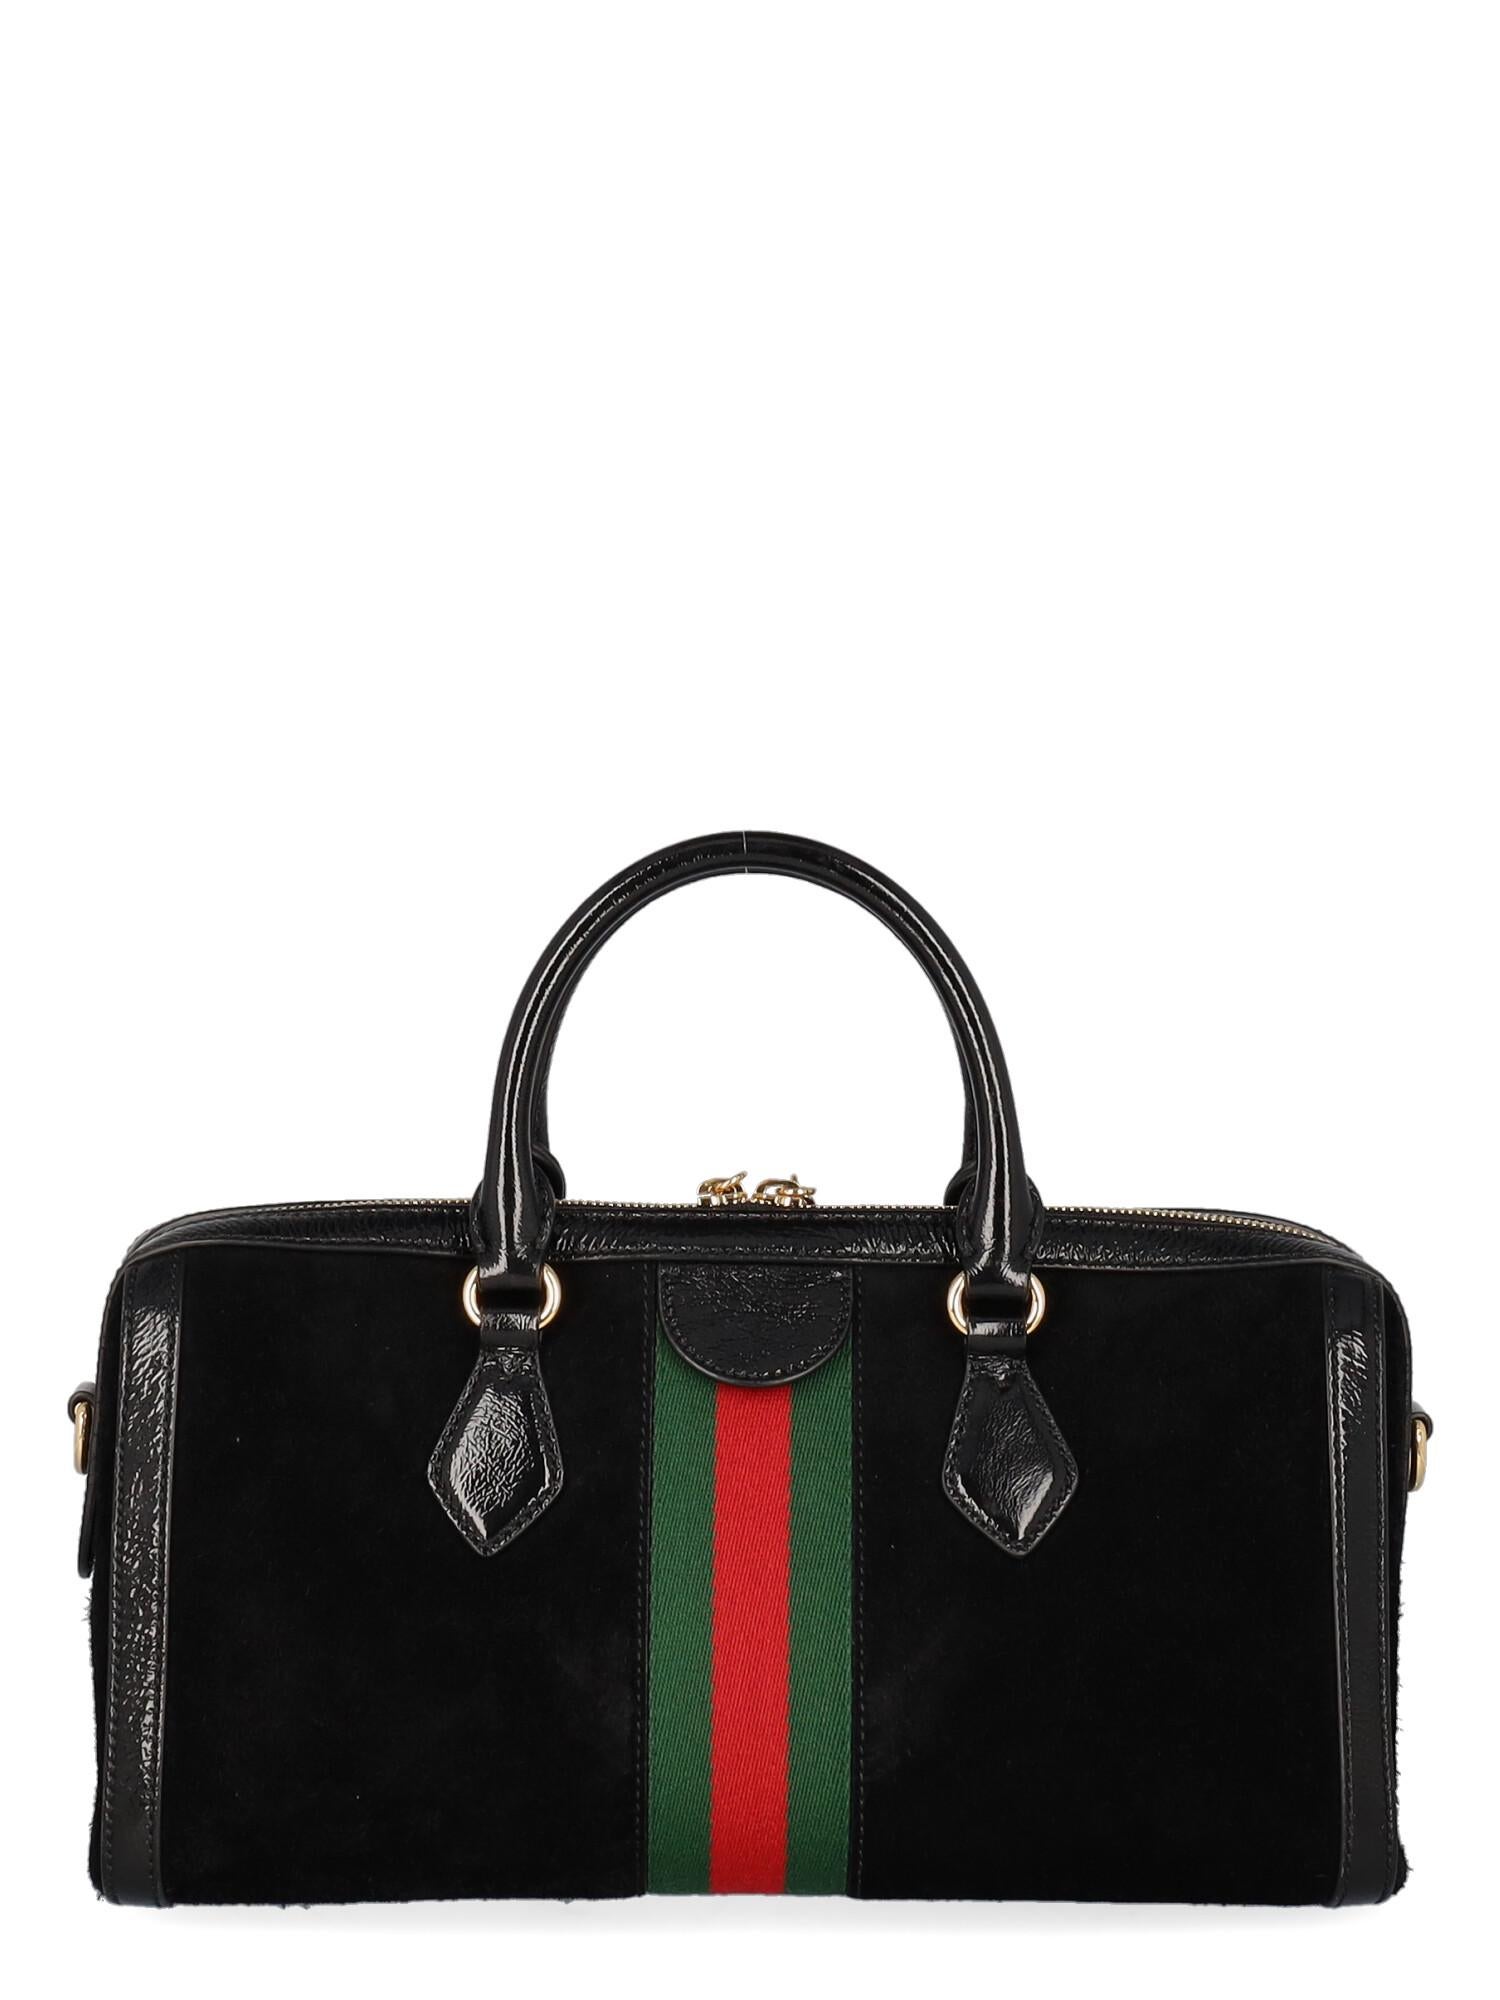 Gucci Women Handbags Ophidia Black, Green, Red Leather  In Excellent Condition For Sale In Milan, IT